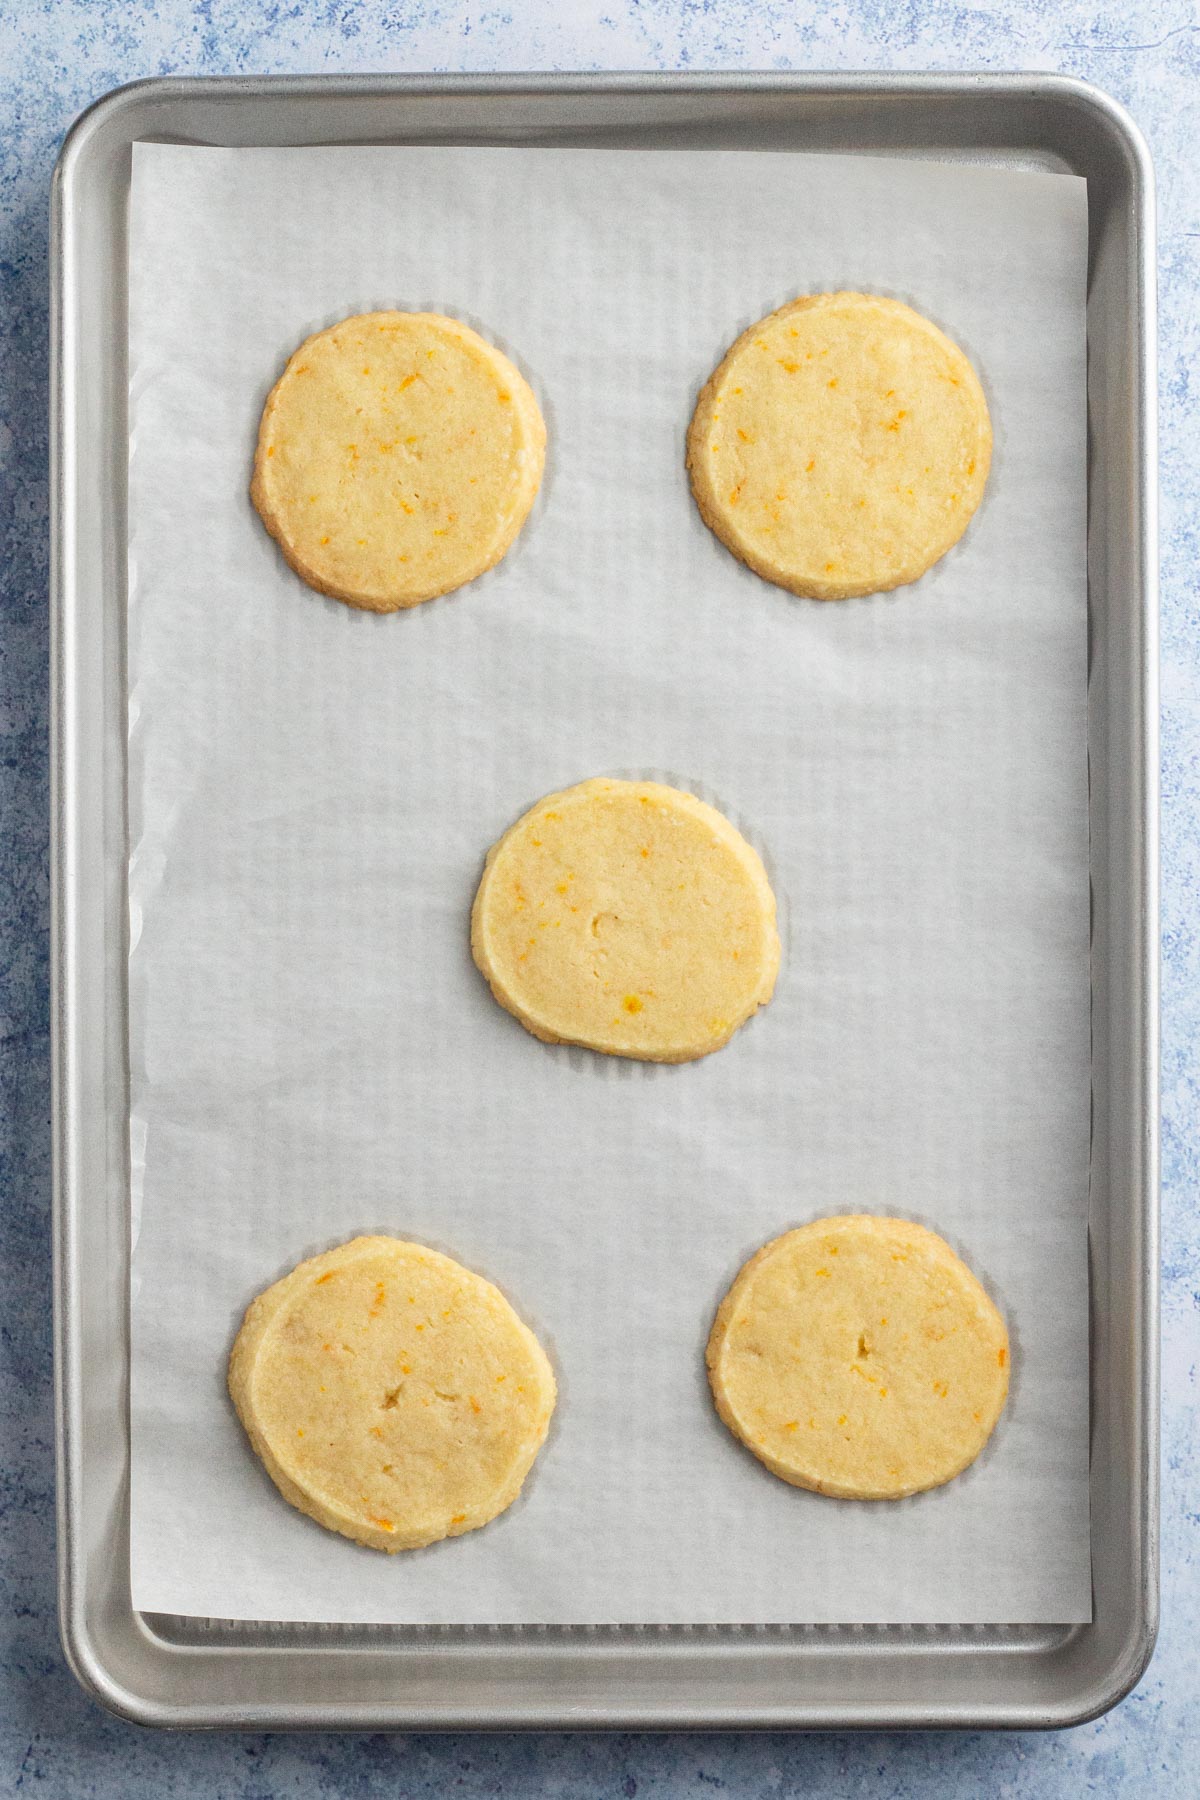 Baked cookies on a parchment-lined baking sheet.